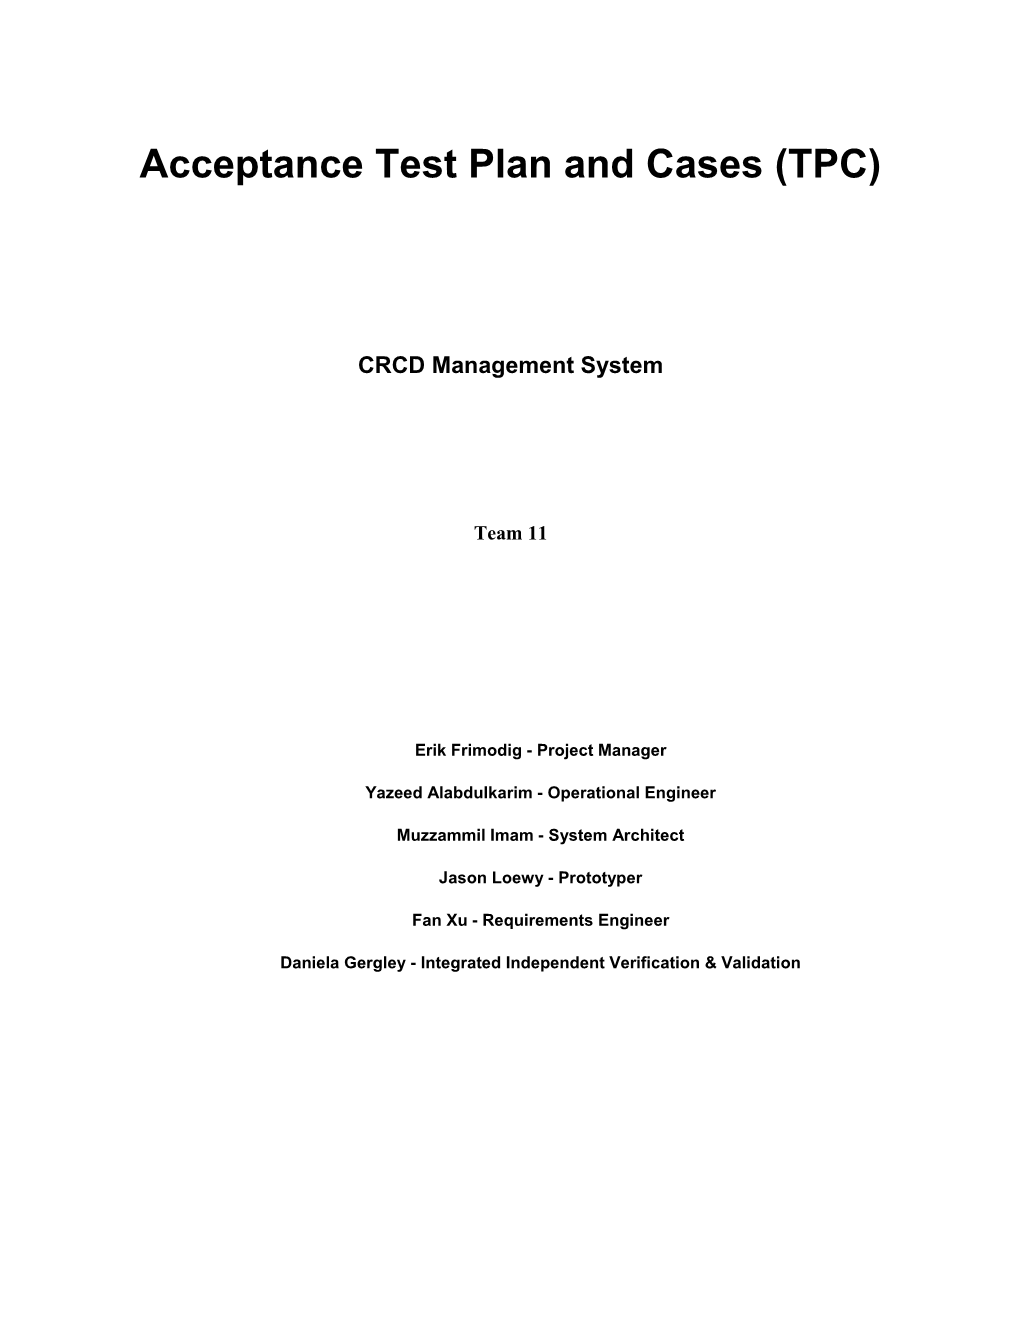 Test Plan and Cases (TPC) s1